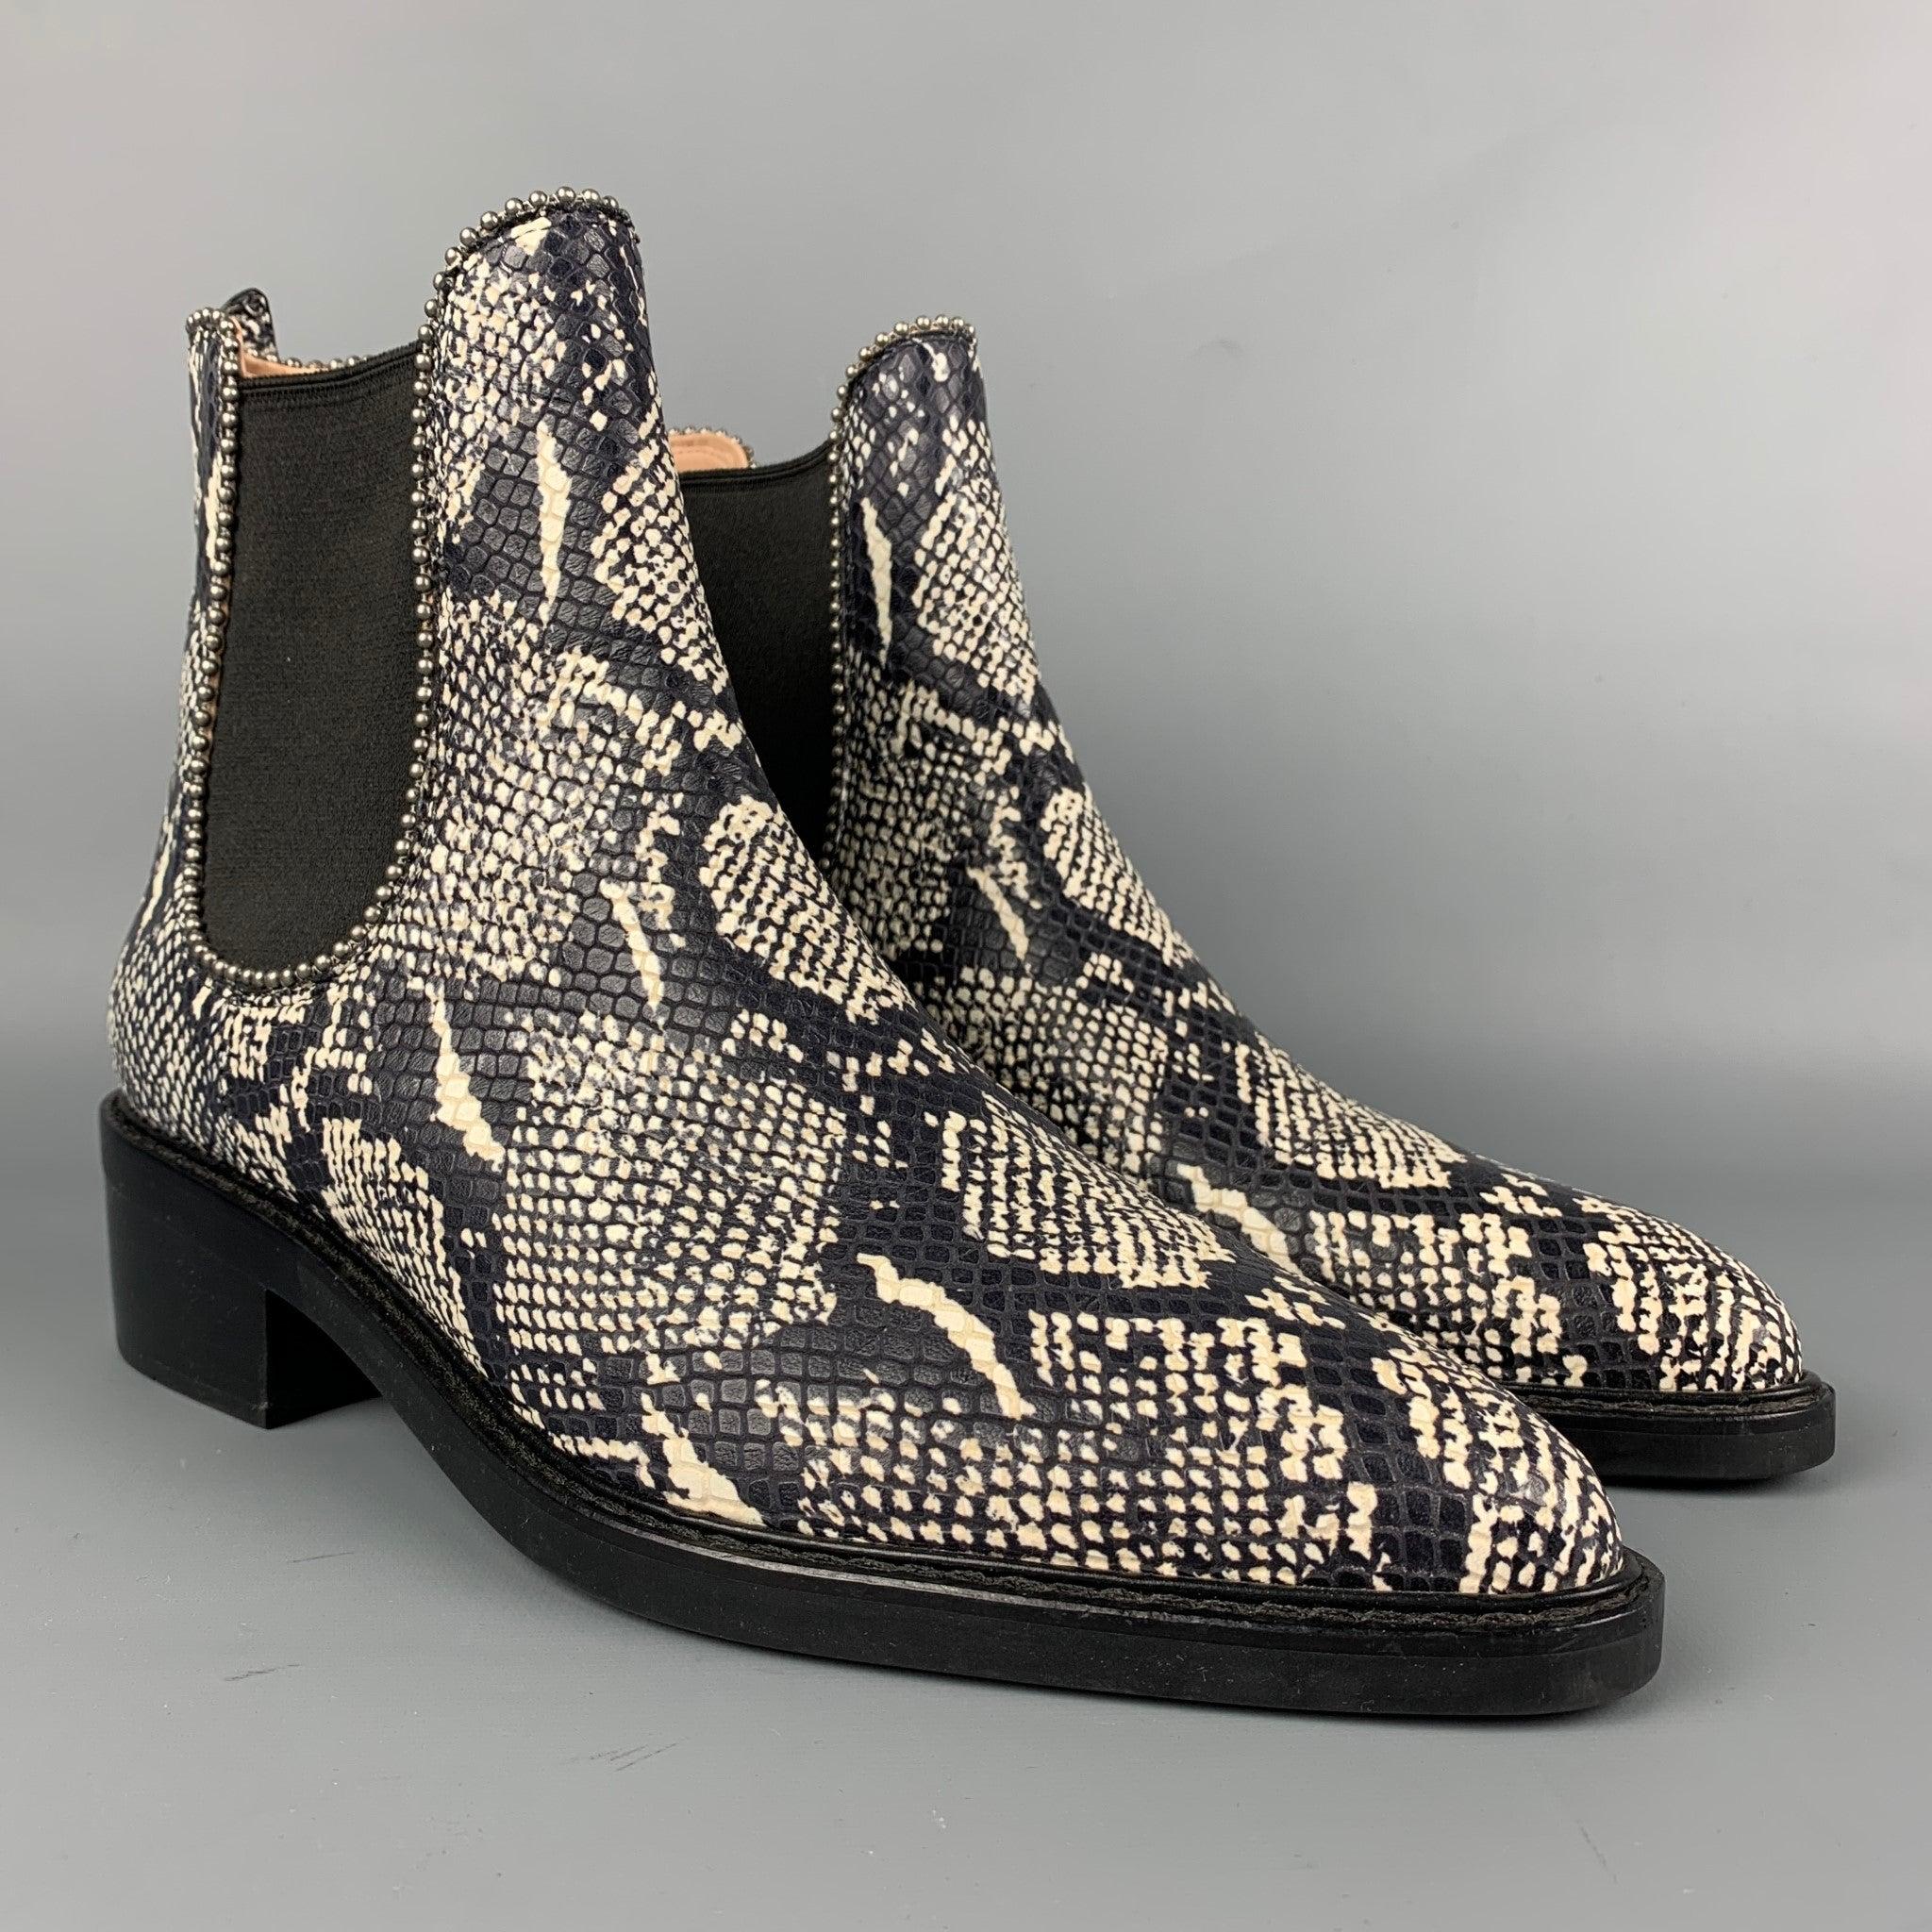 COACH ankle boots comes in a black & white textured embossed faux snake skin featuring a chelsea style, pointed toe, studded details, and a stacked heel.
Very Good
Pre-Owned Condition. 

Marked:   11 B  

Measurements: 
  Length: 11.5 inches  Width: